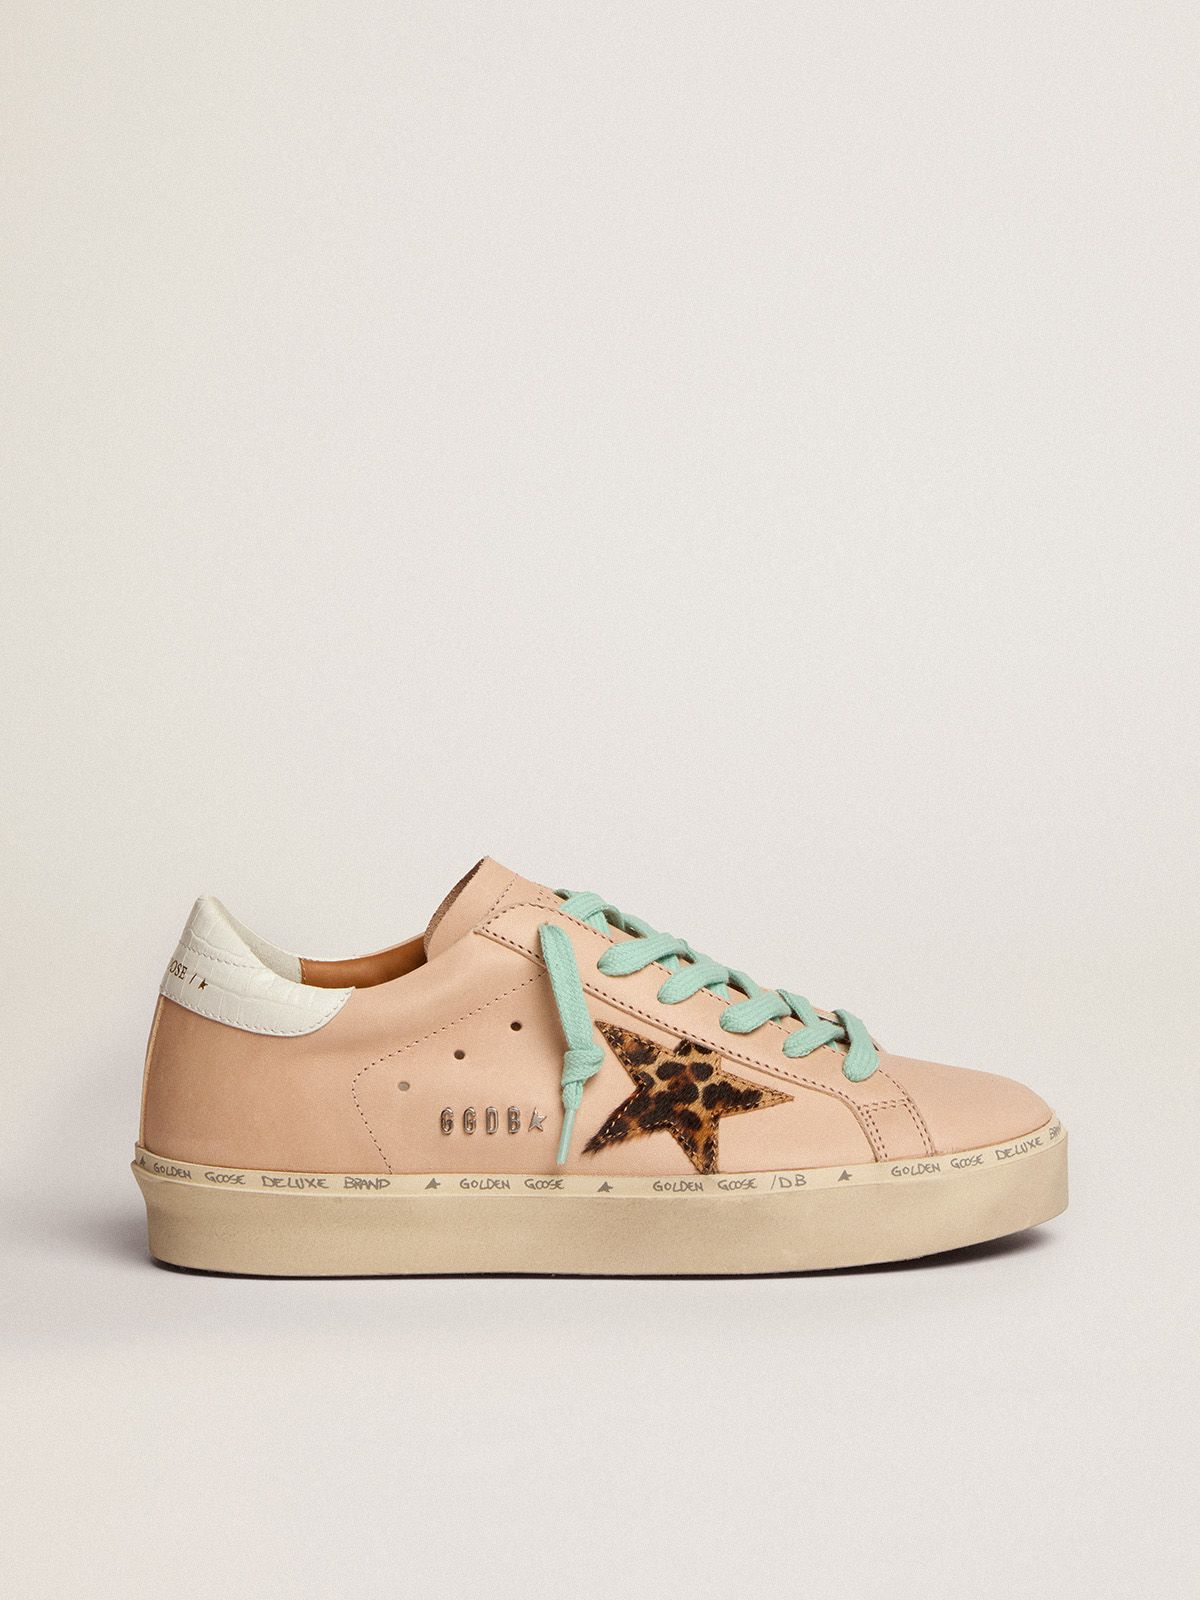 golden goose heel crocodile-print tab pony Hi sneakers skin star with leather leopard-print and white Star